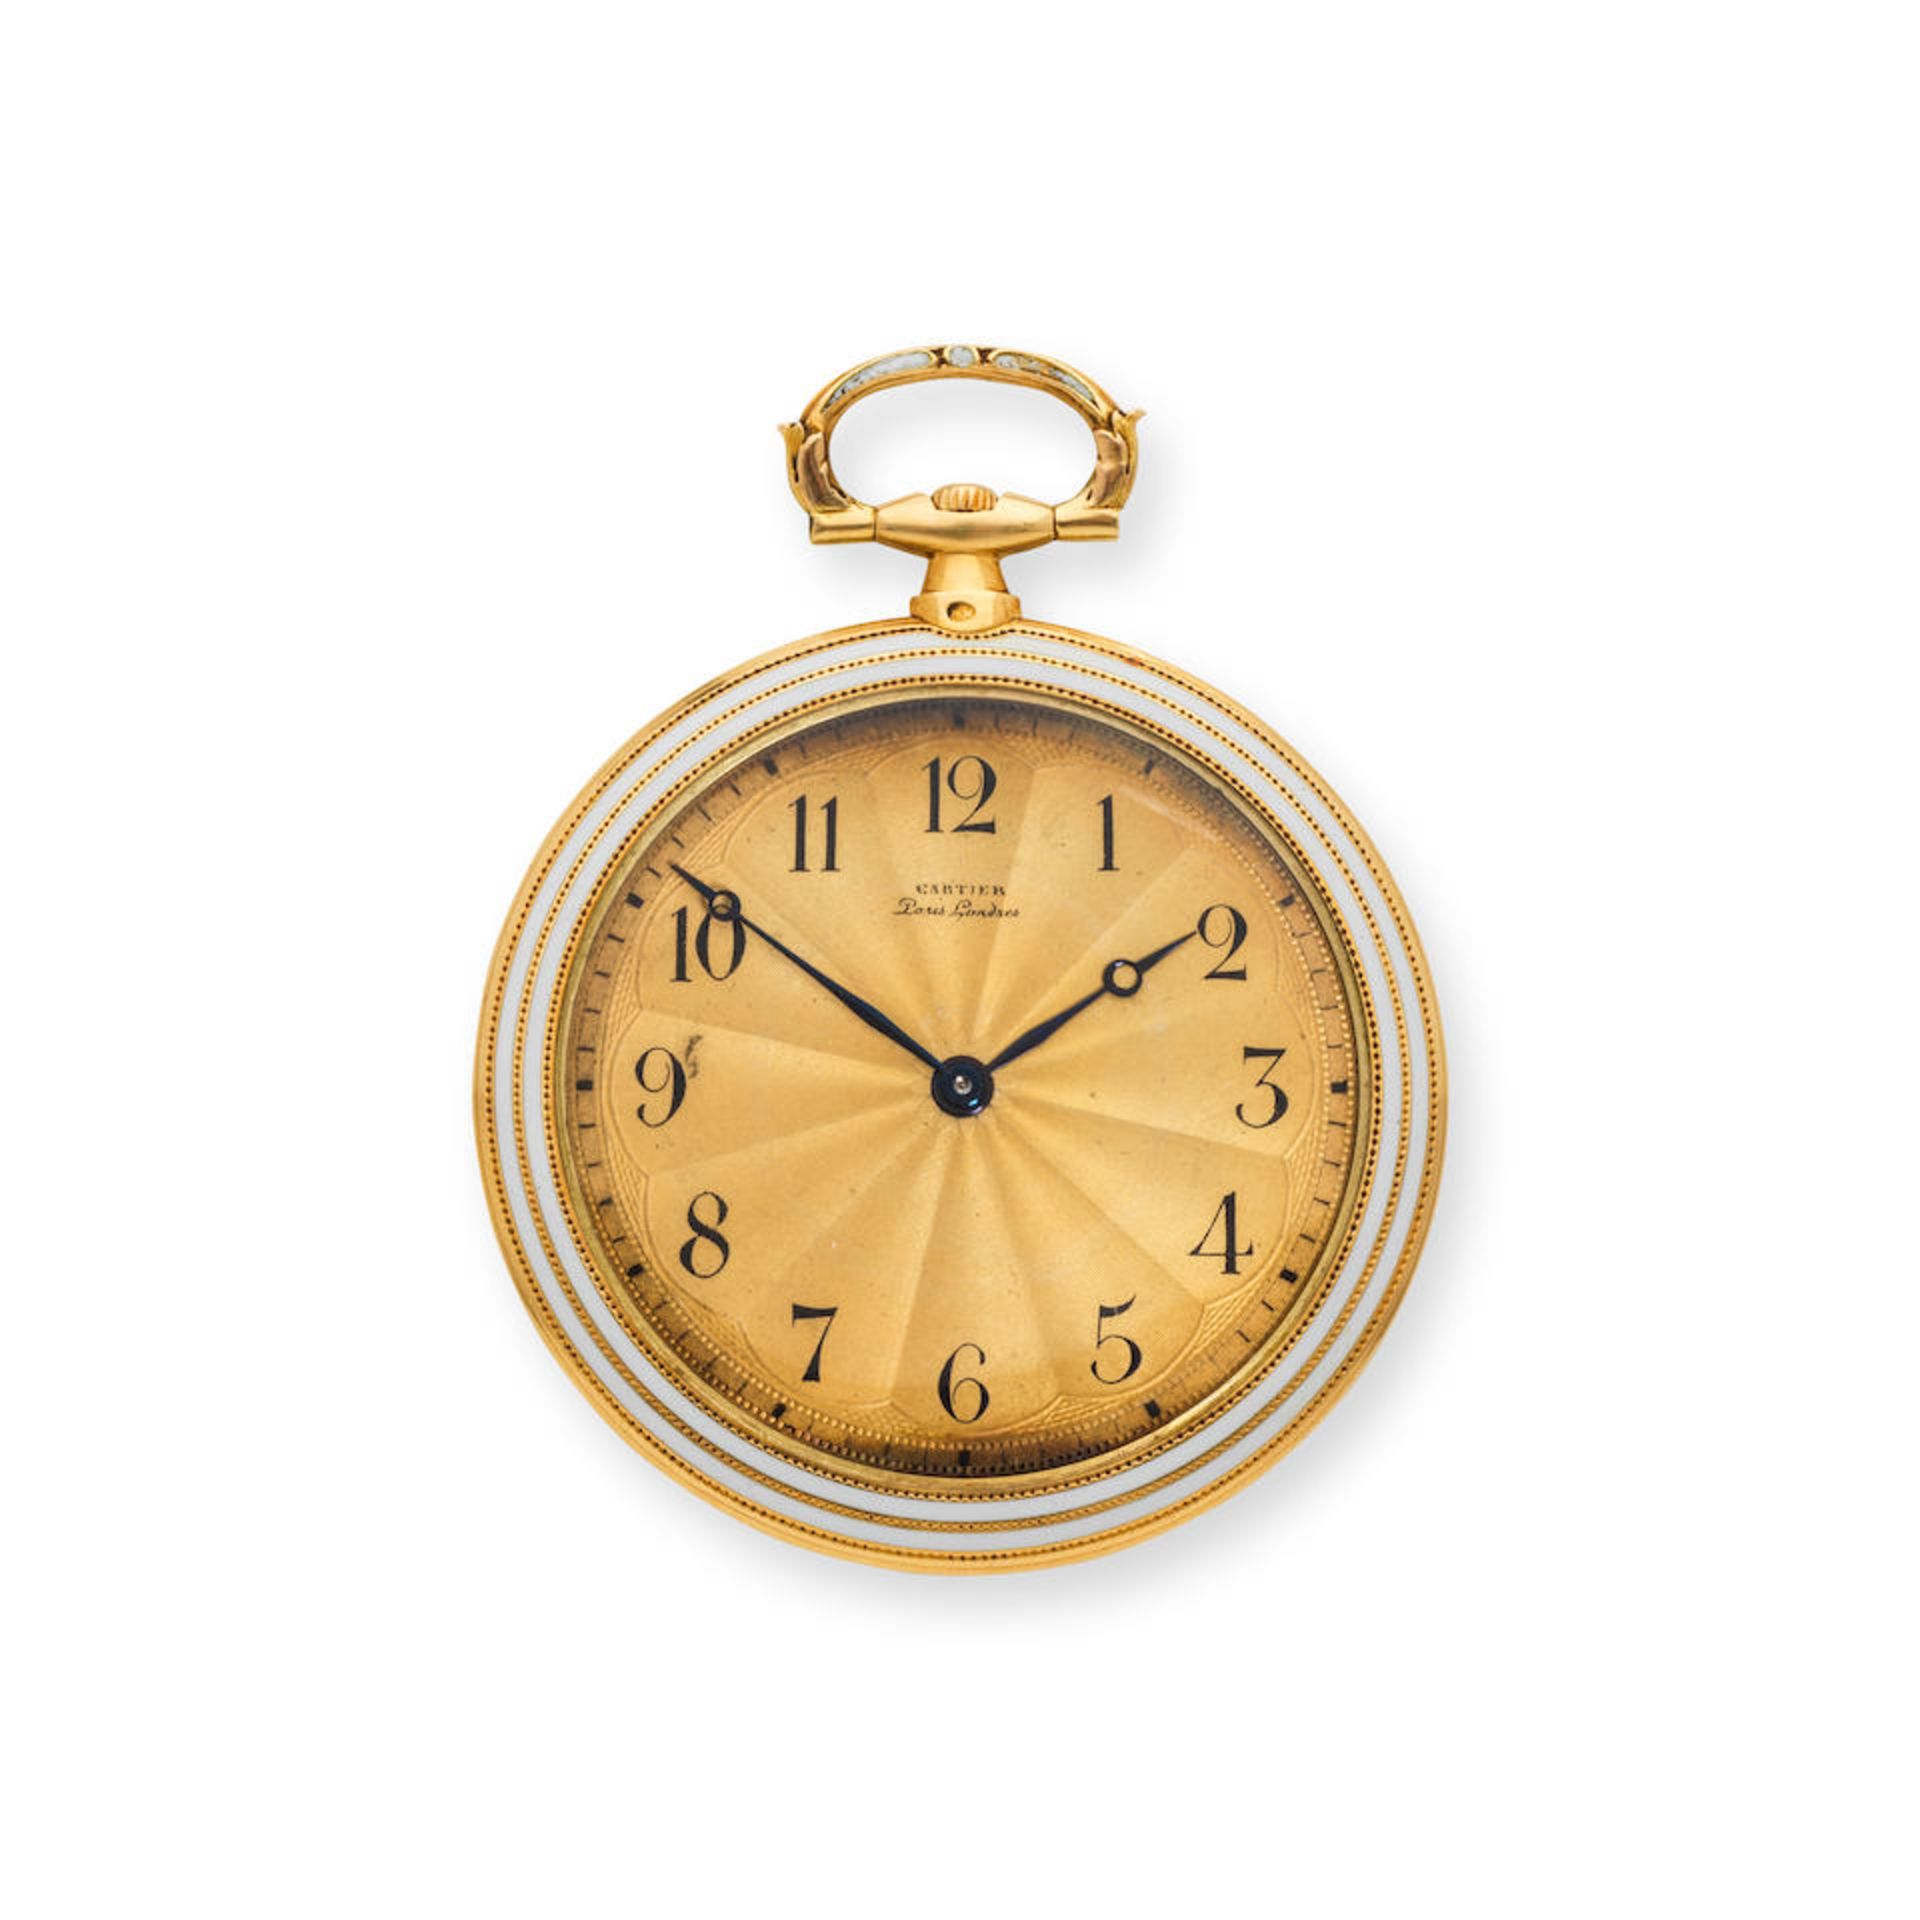 Cartier. A very fine and very rare open face 18K gold keyless wind pocket watch with beautifully...